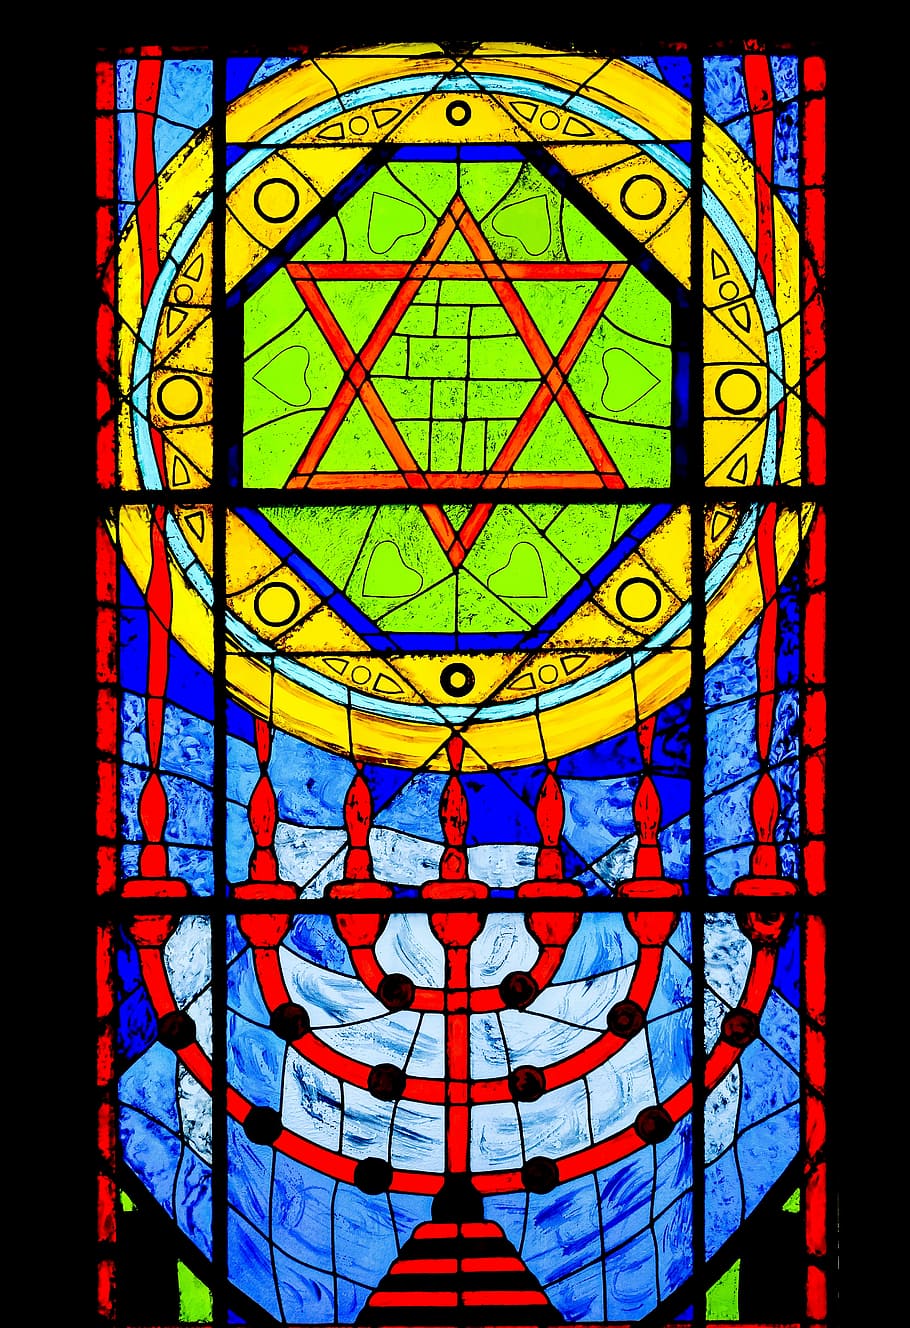 Star of David and candle holder painting, vitrage, menorah, stained glass